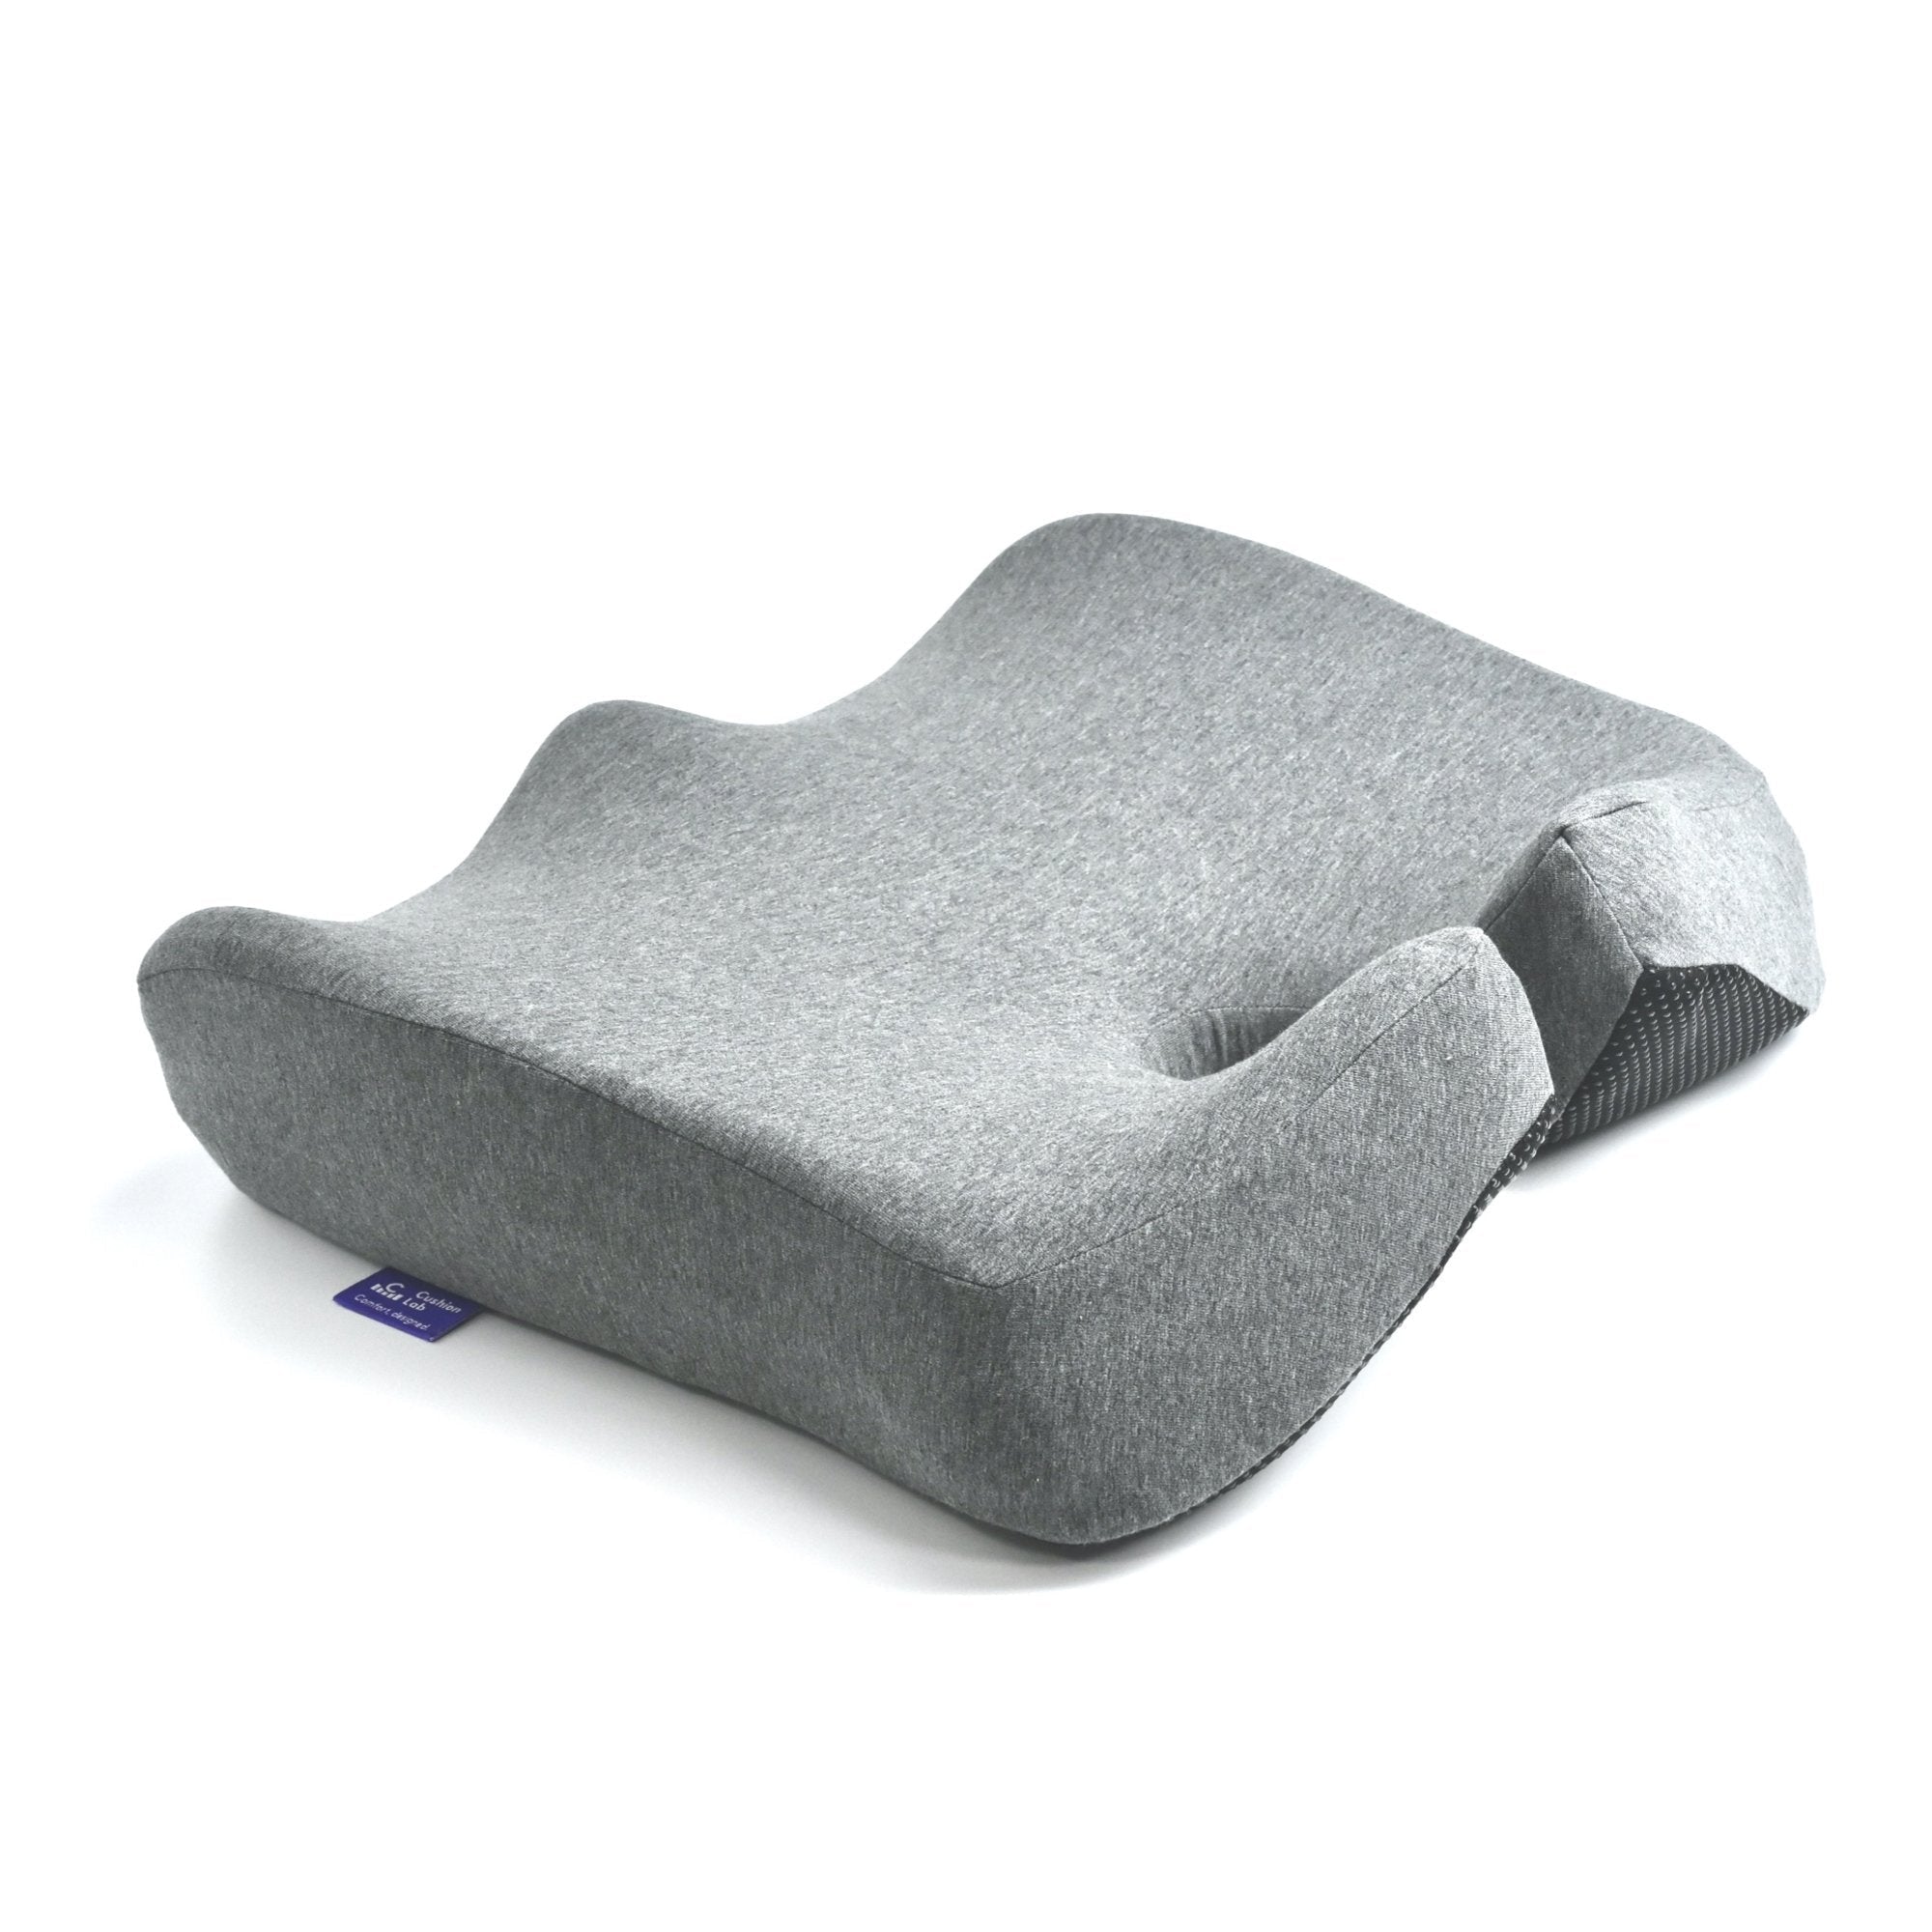 This seat cushion from Cushion Lab is a game changer for me! #fittruck